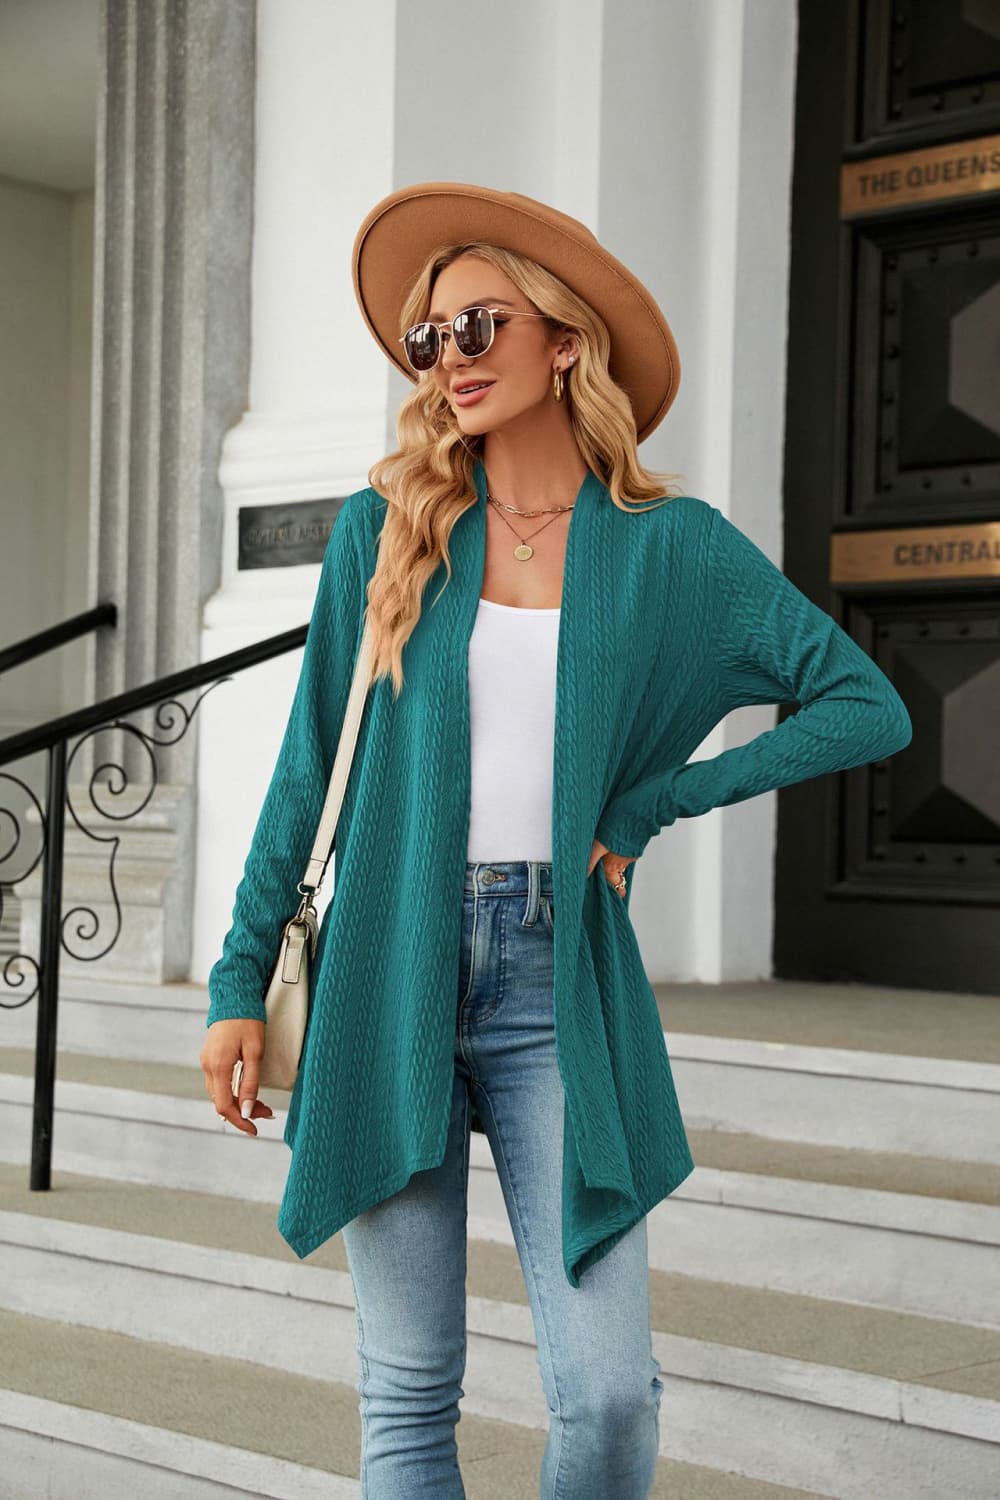 Long Sleeve Cardigan - Teal / S - Women’s Clothing & Accessories - Shirts & Tops - 13 - 2024